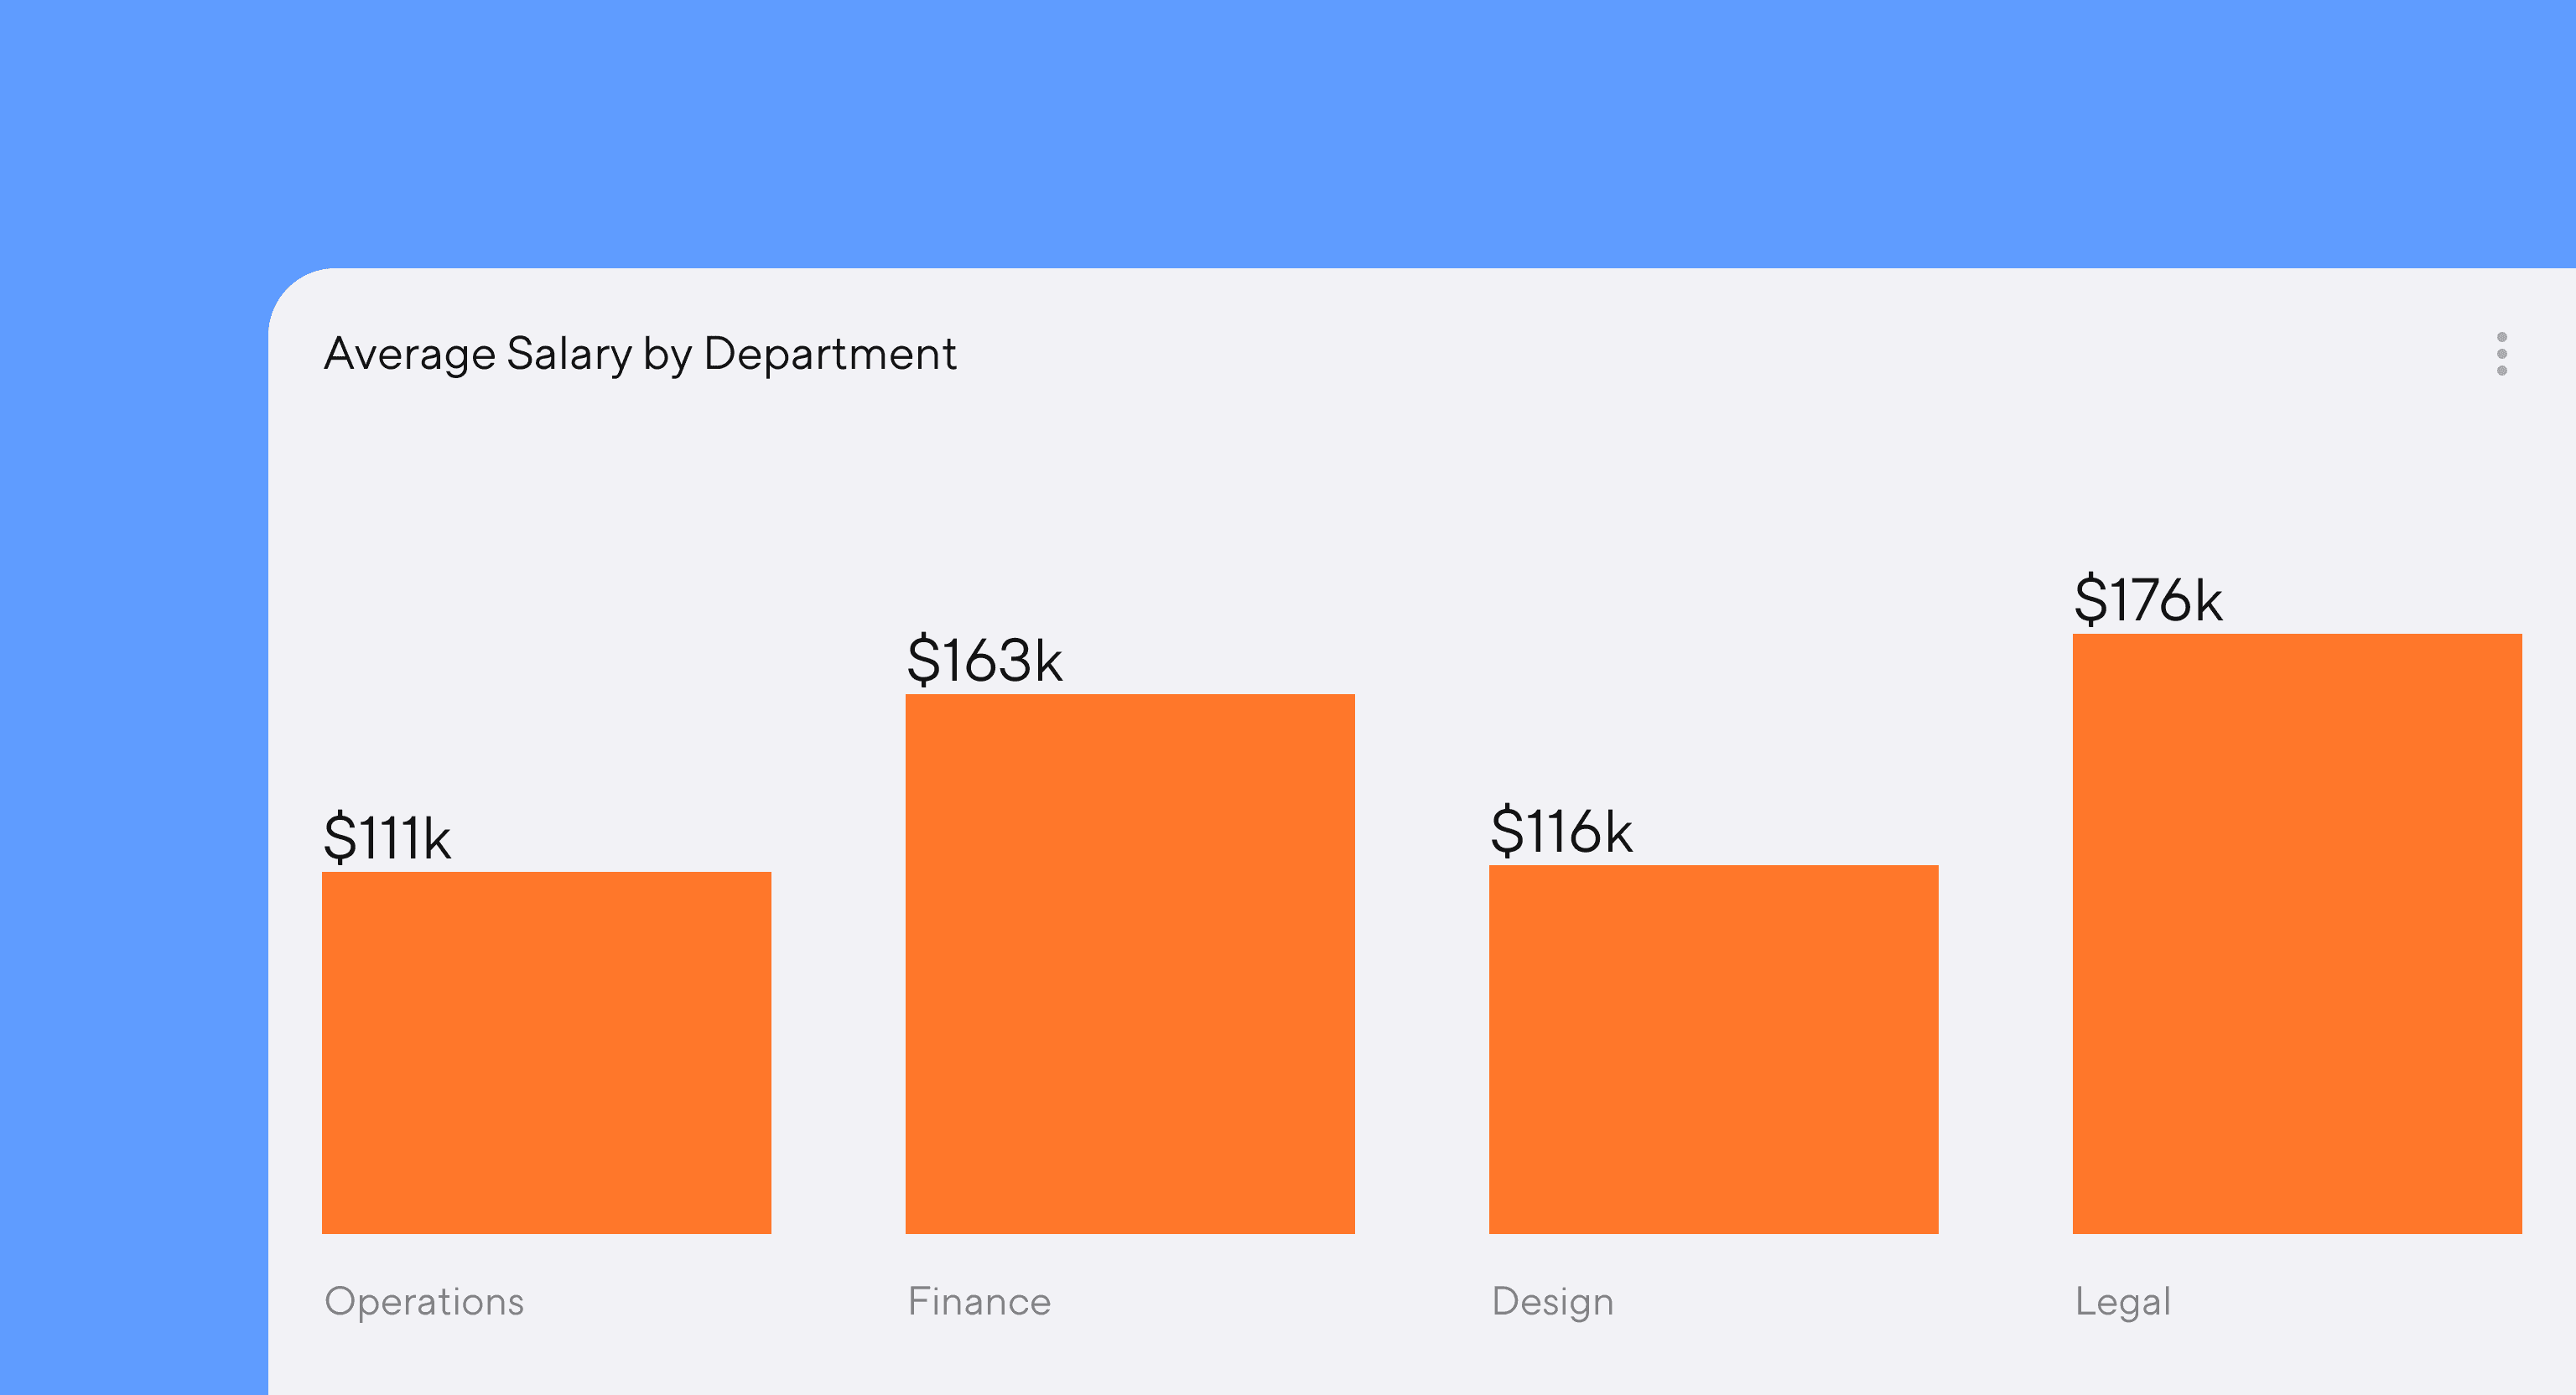 Bar chart titled Average Salary by Department. Operations is $111k, Finance is $163k, Design is $116k, and Legal is $176k.